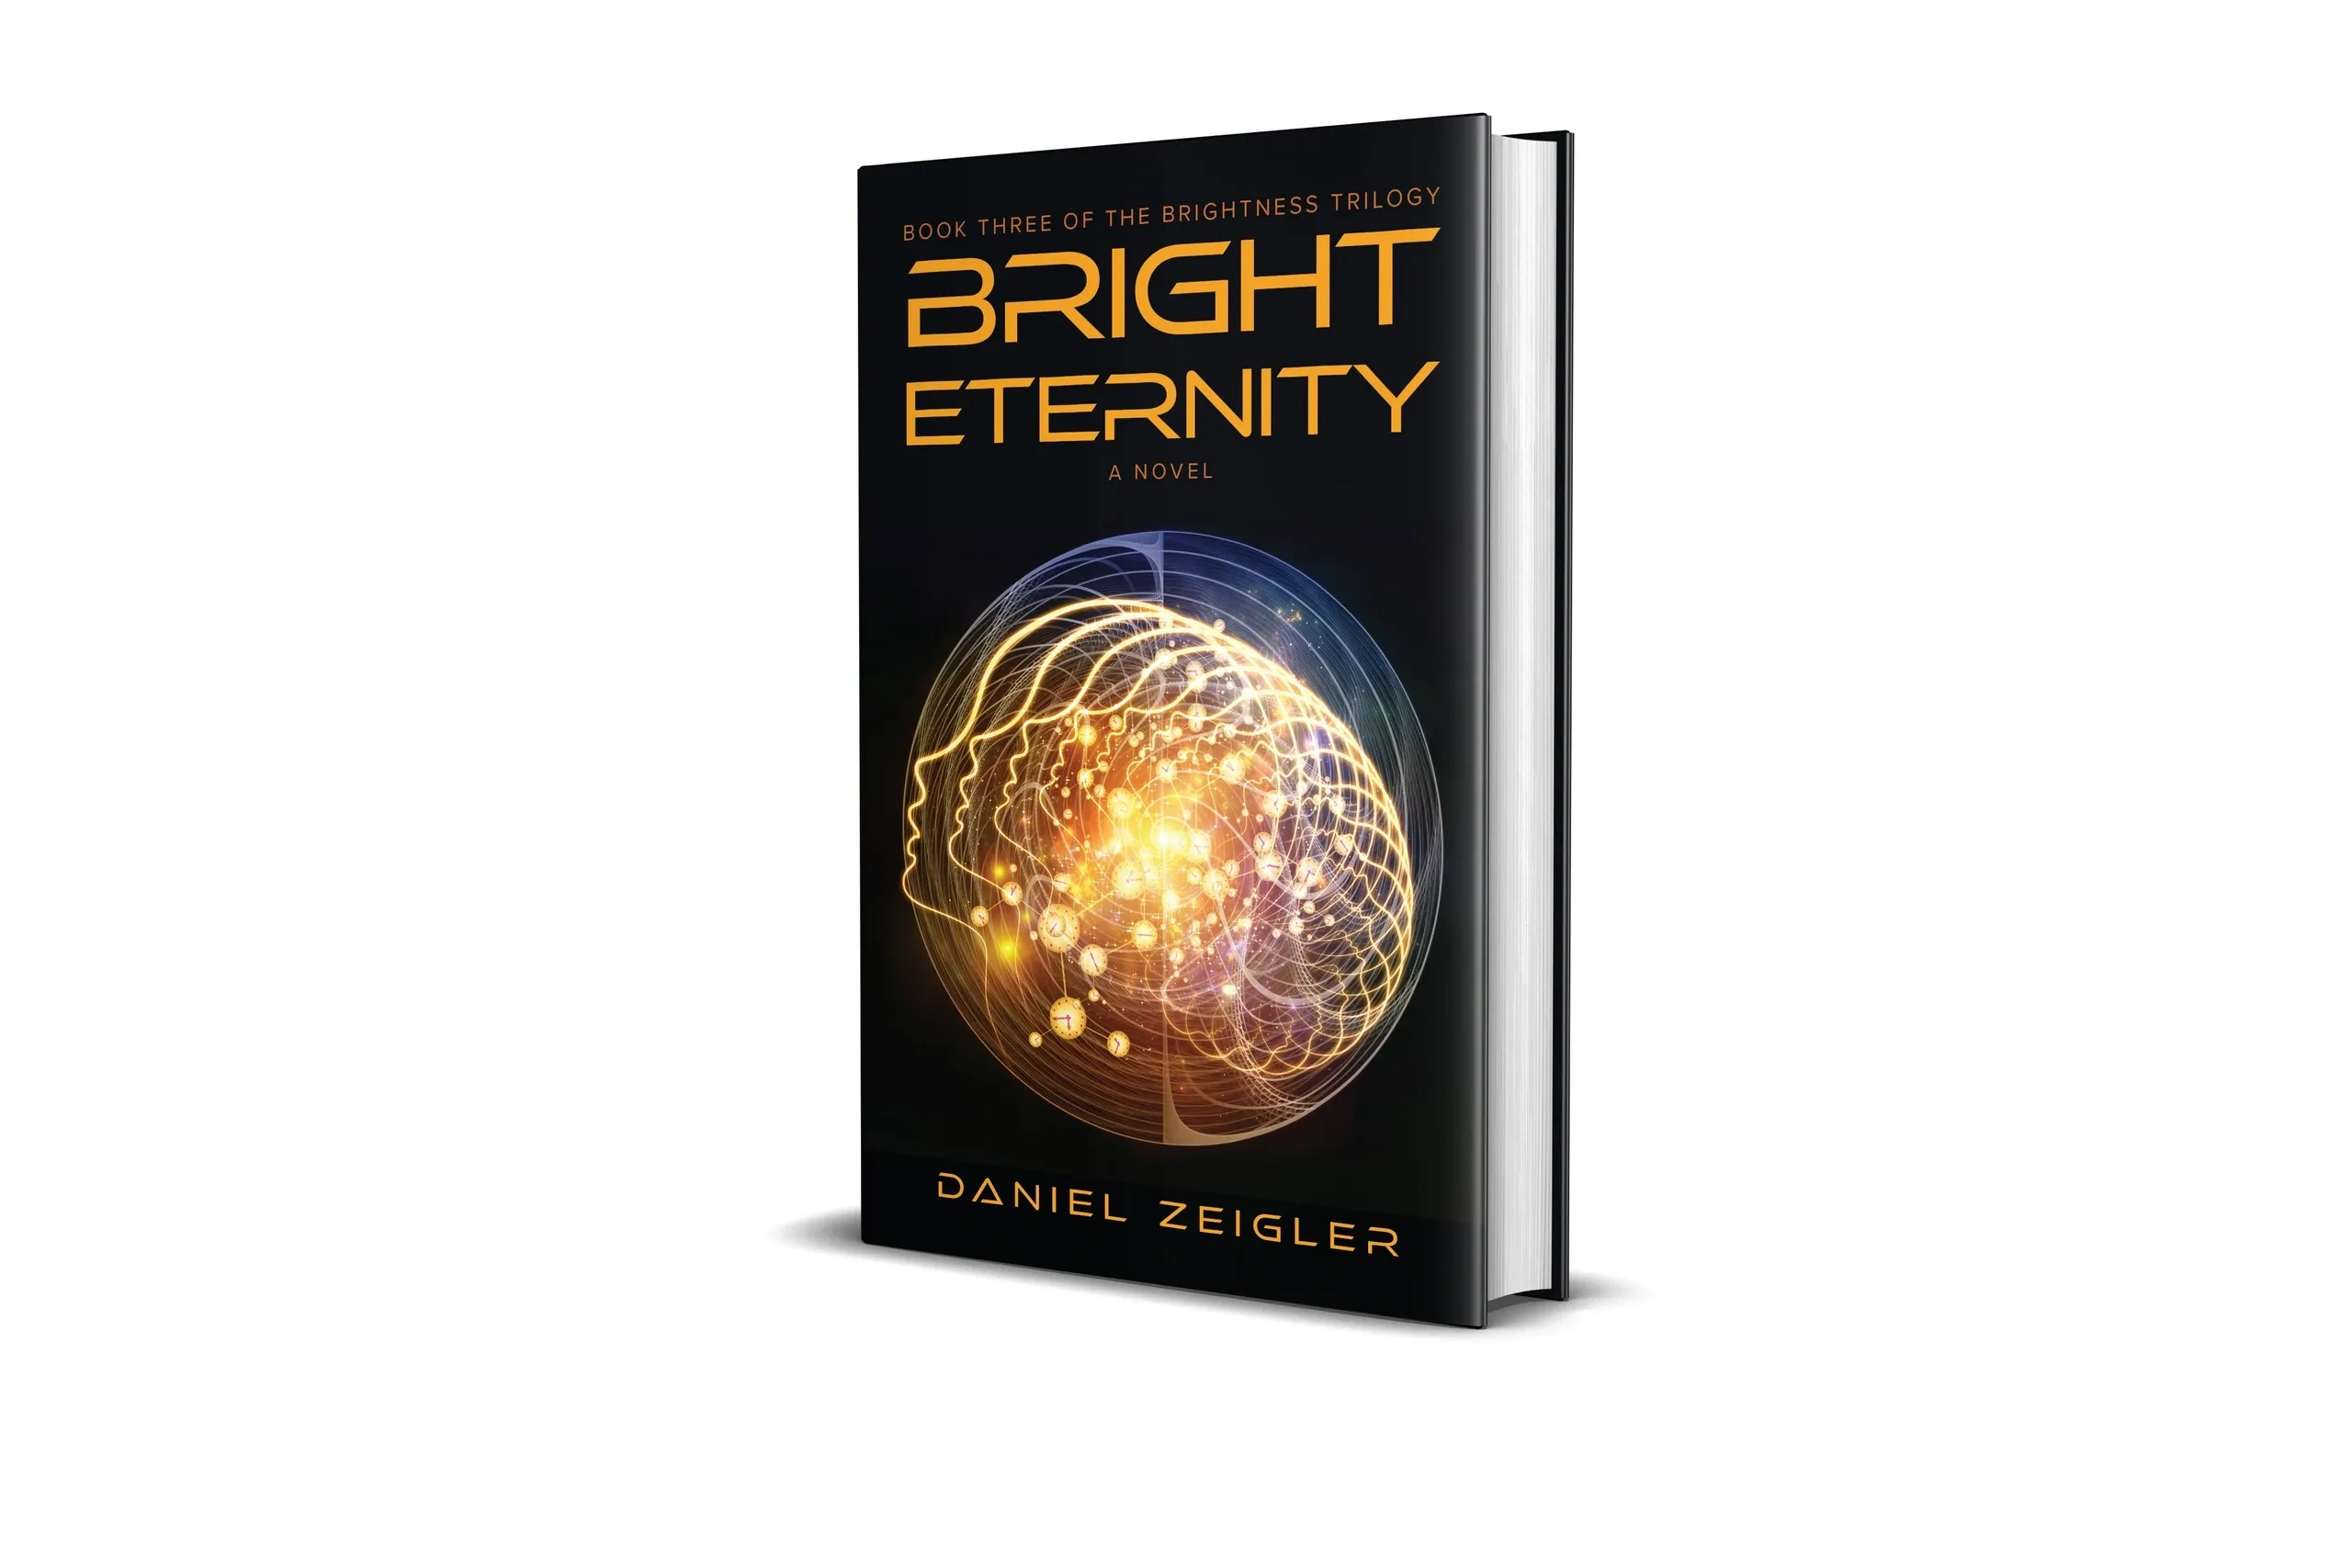 Book cover for "Bright Eternity"